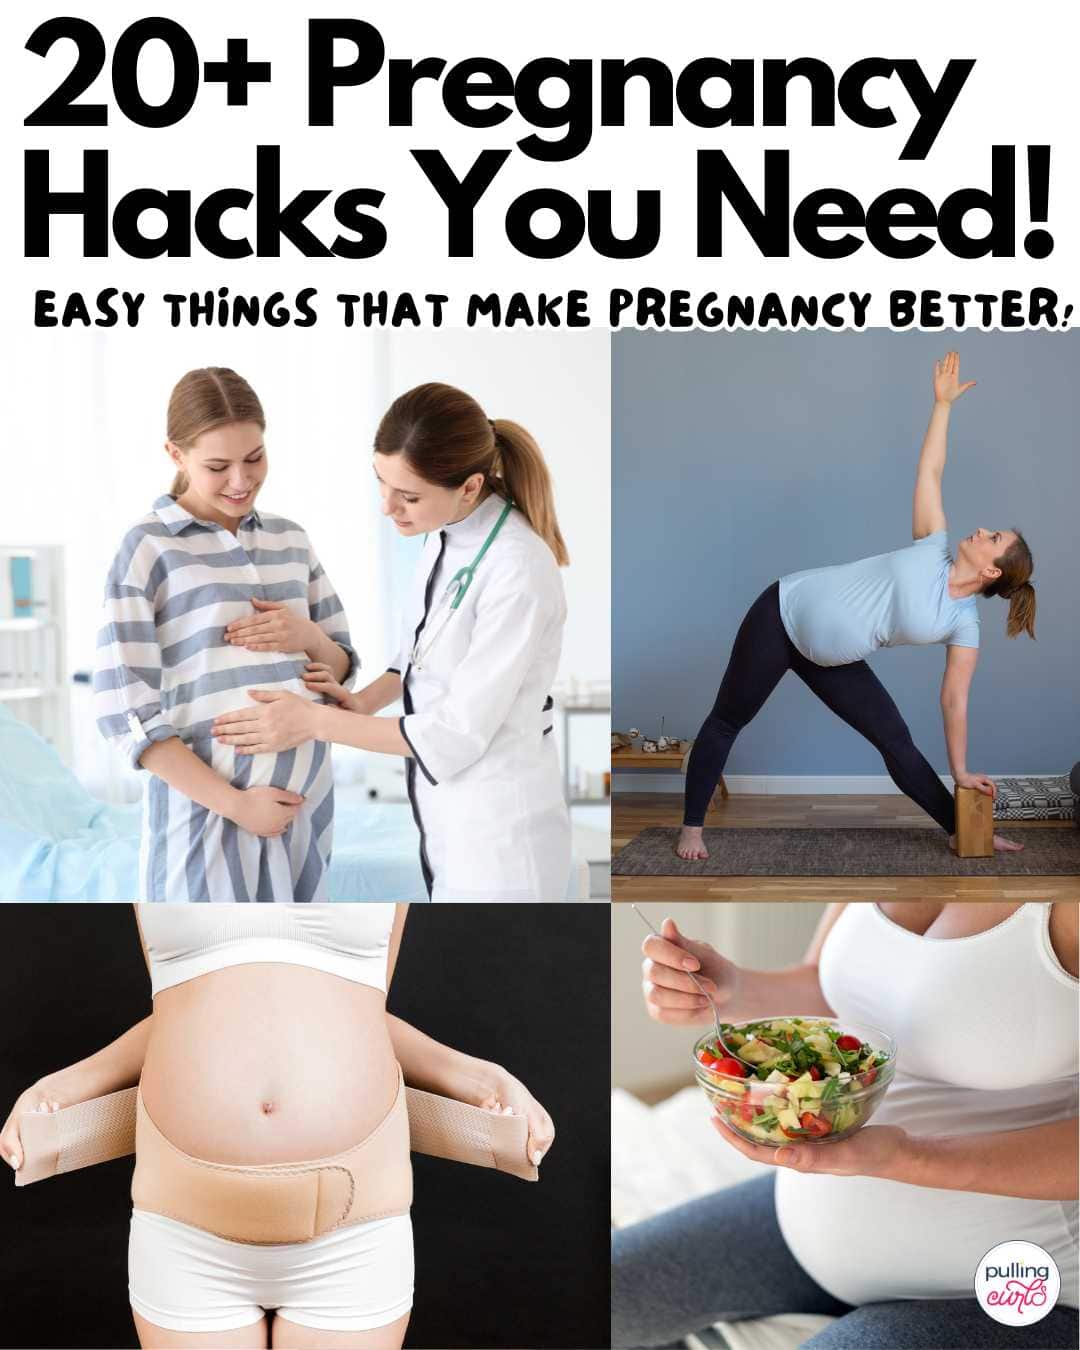 20+ pregnancy hacks you need // easy things that make pregnancy better // photos of a pregnant woman and he provider, one doing yoga, one wearing a belly band, one eating salad. via @pullingcurls